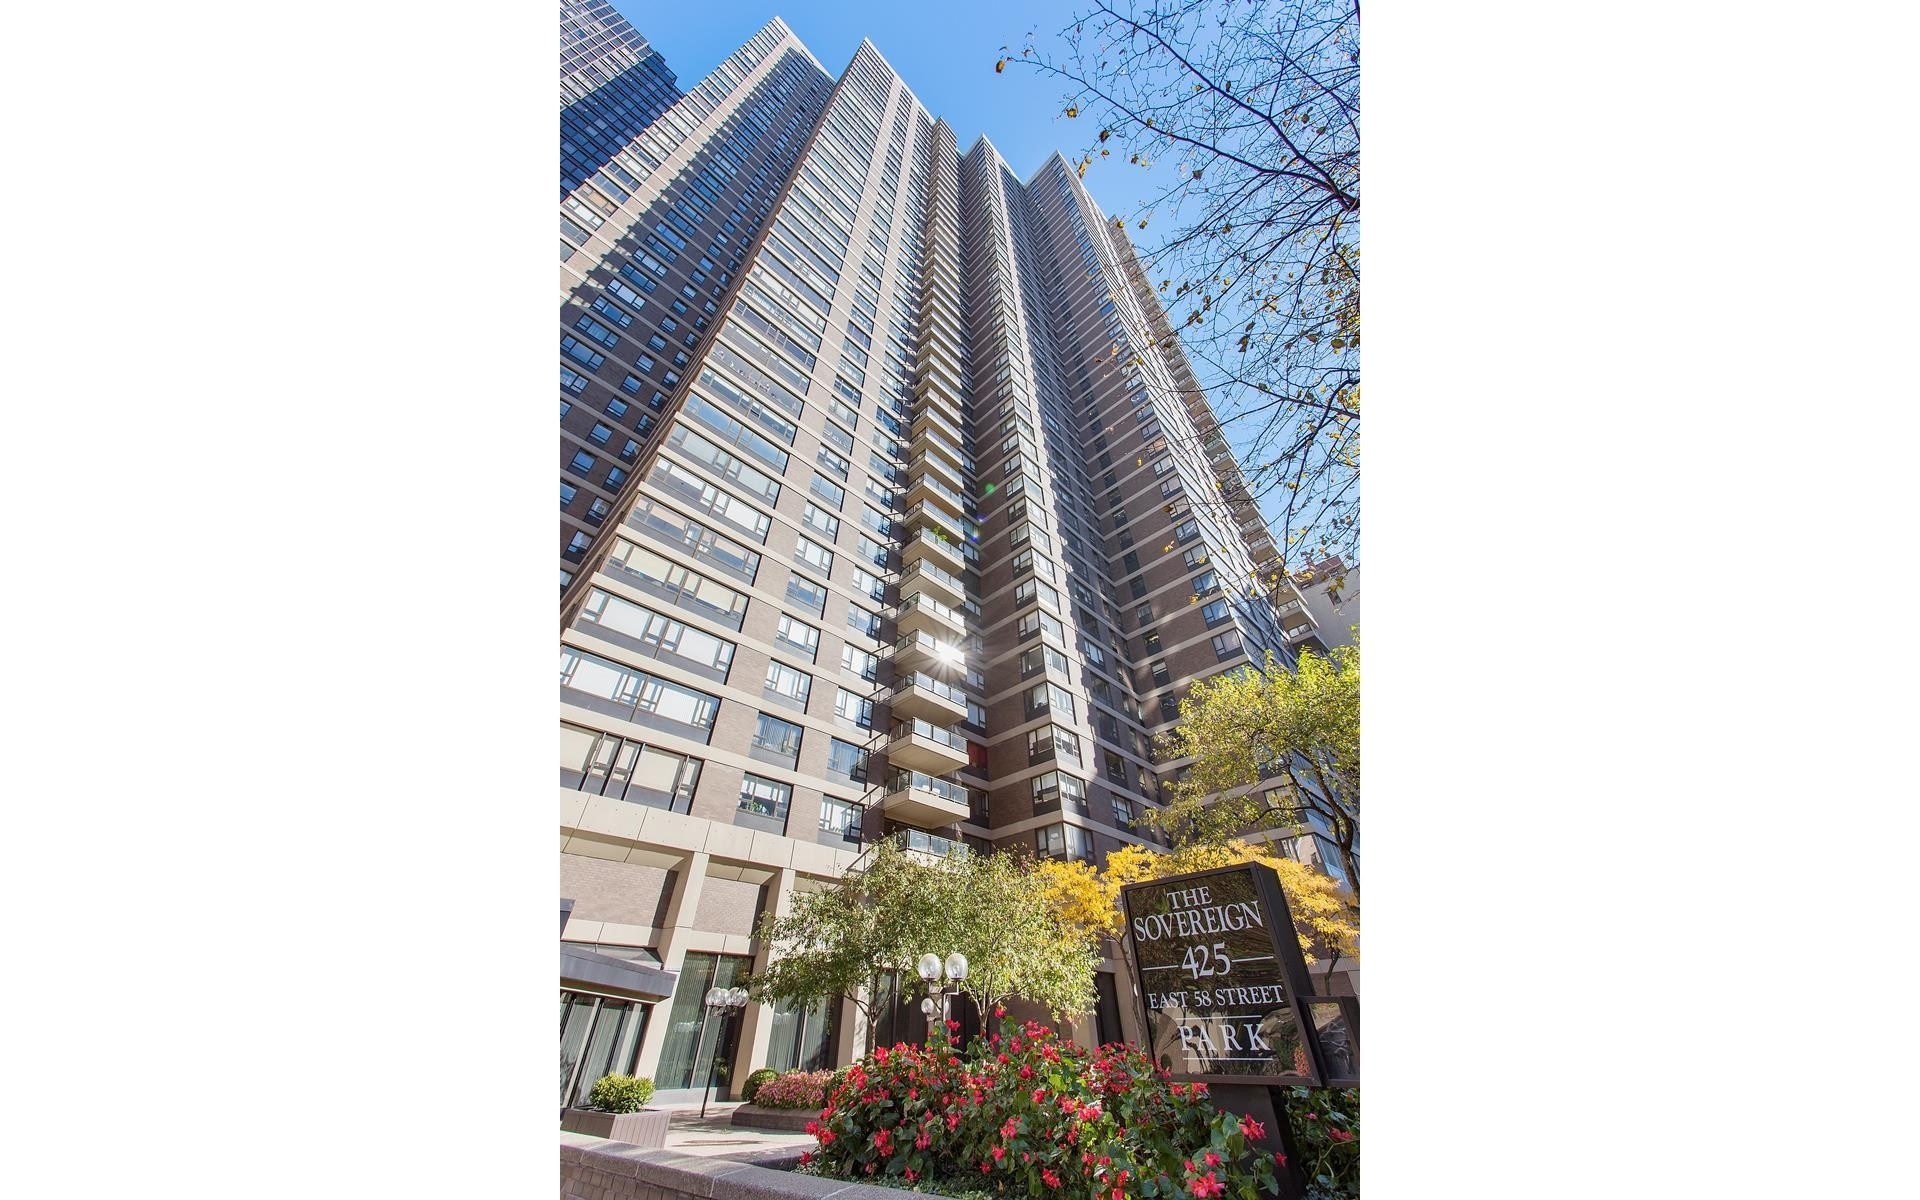 8. Co-op Properties for Sale at The Sovereign, 425 E 58TH ST, 16A Sutton Place, New York, NY 10022